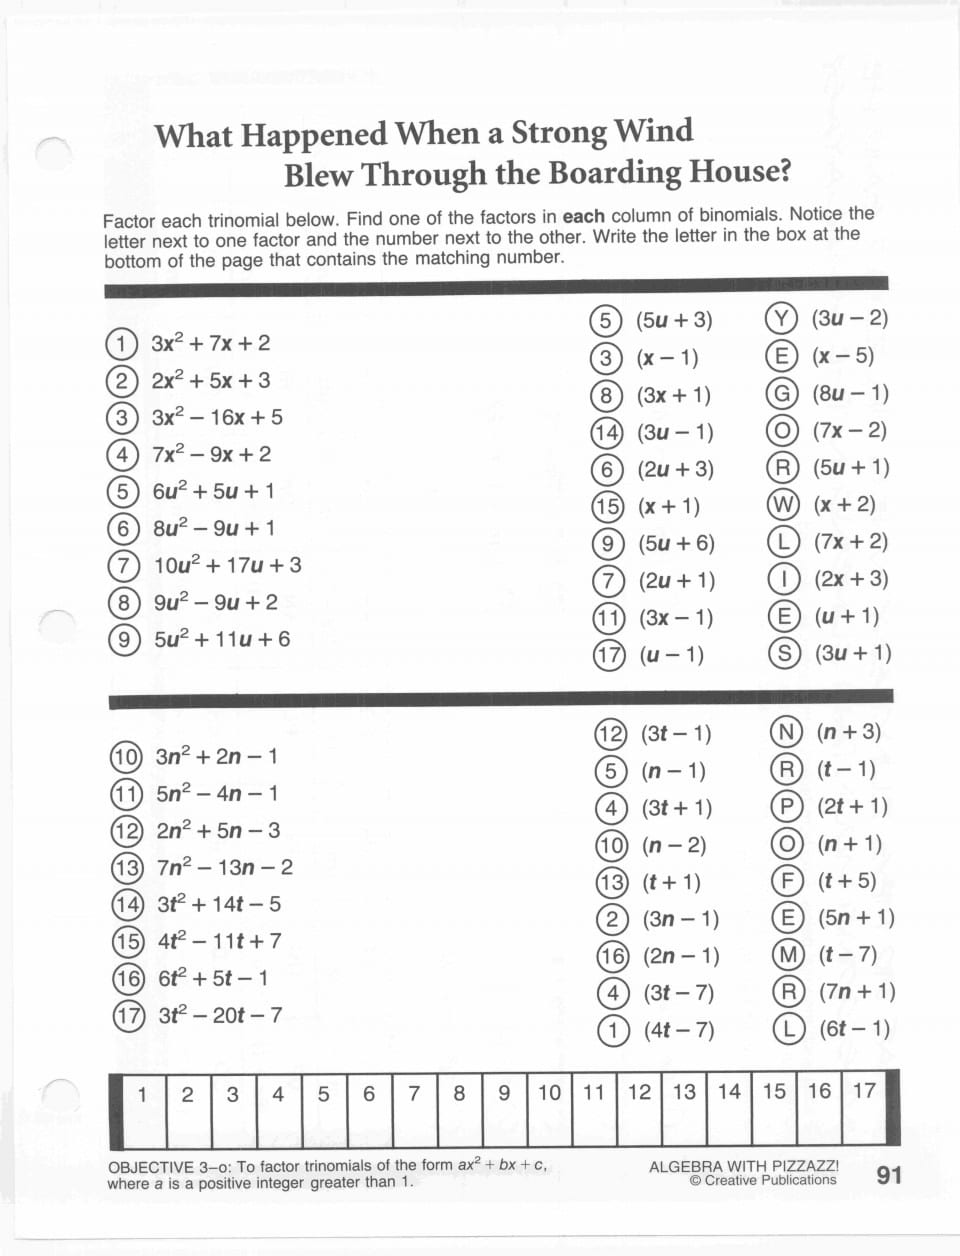 did-you-hear-about-math-worksheet-answers-grade-worksheet-printable